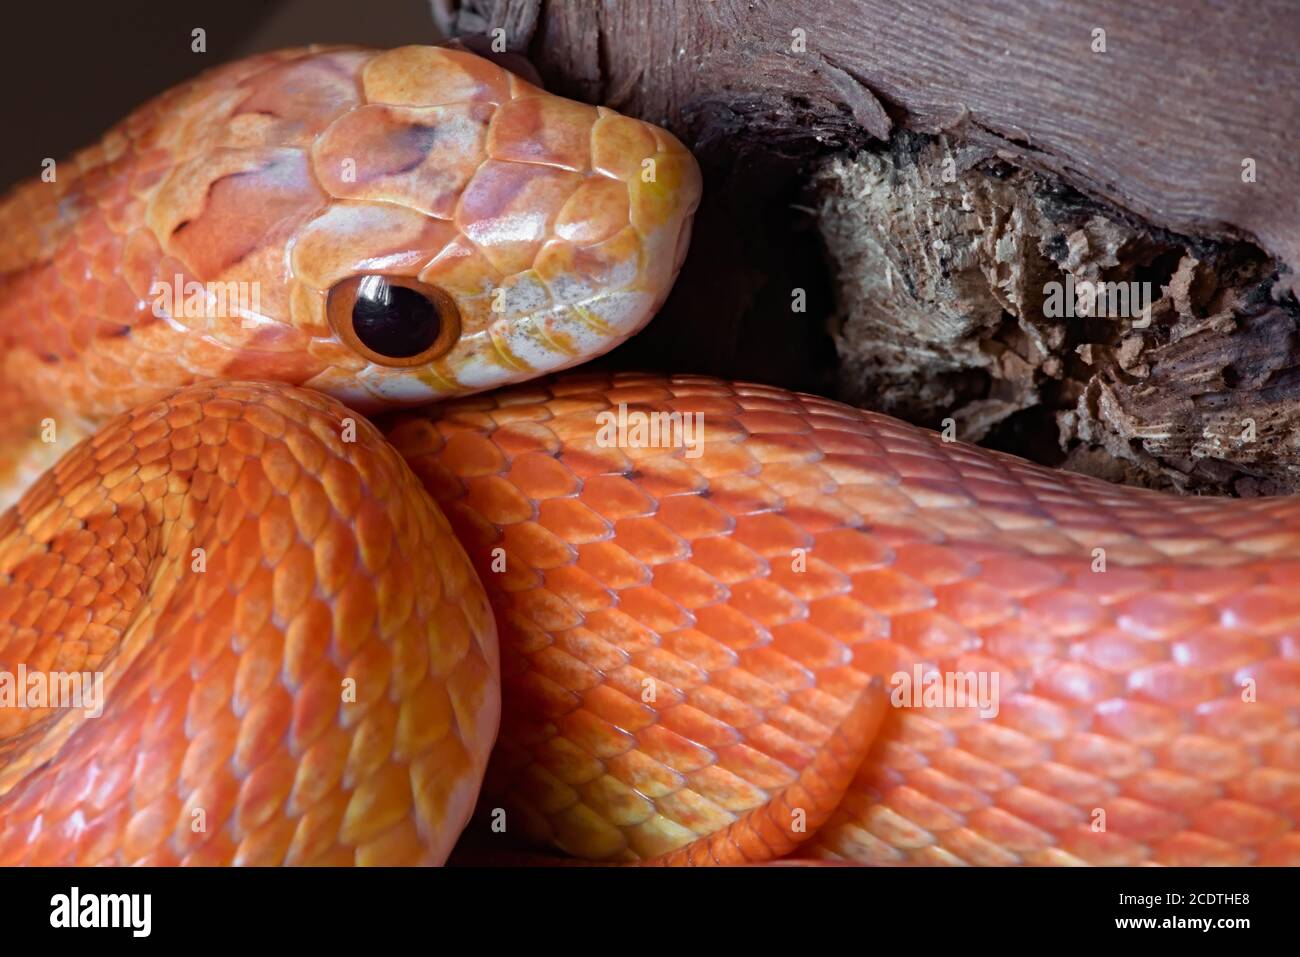 Macro close up image of orange and yellow pet corn snake. Side of face and end of tail visible over vibrantly colored coils. Stock Photo